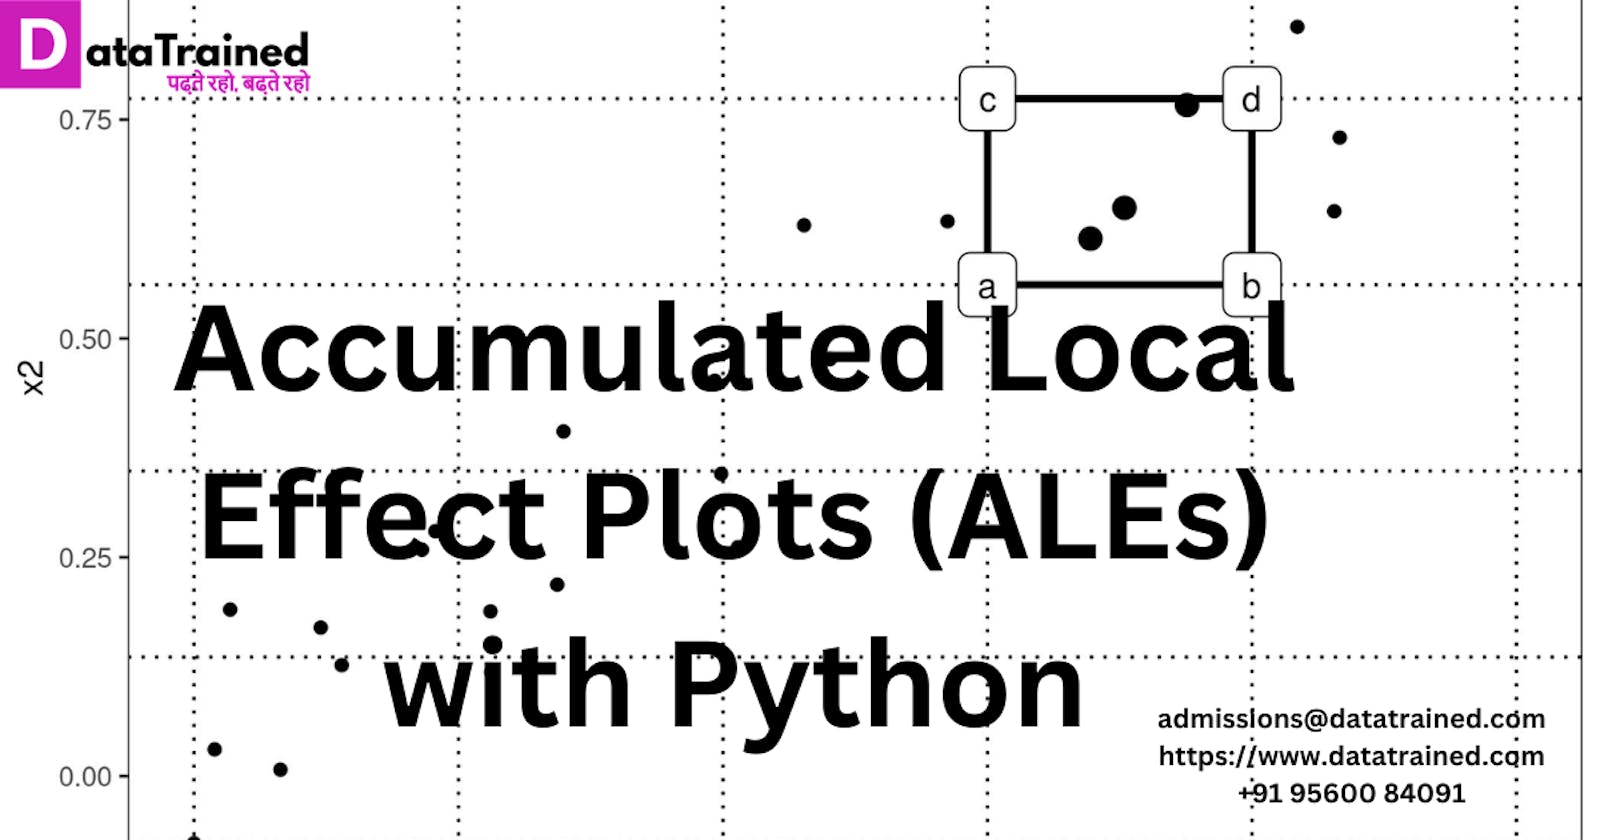 Accumulated Local Effect Plots (ALEs) with Python